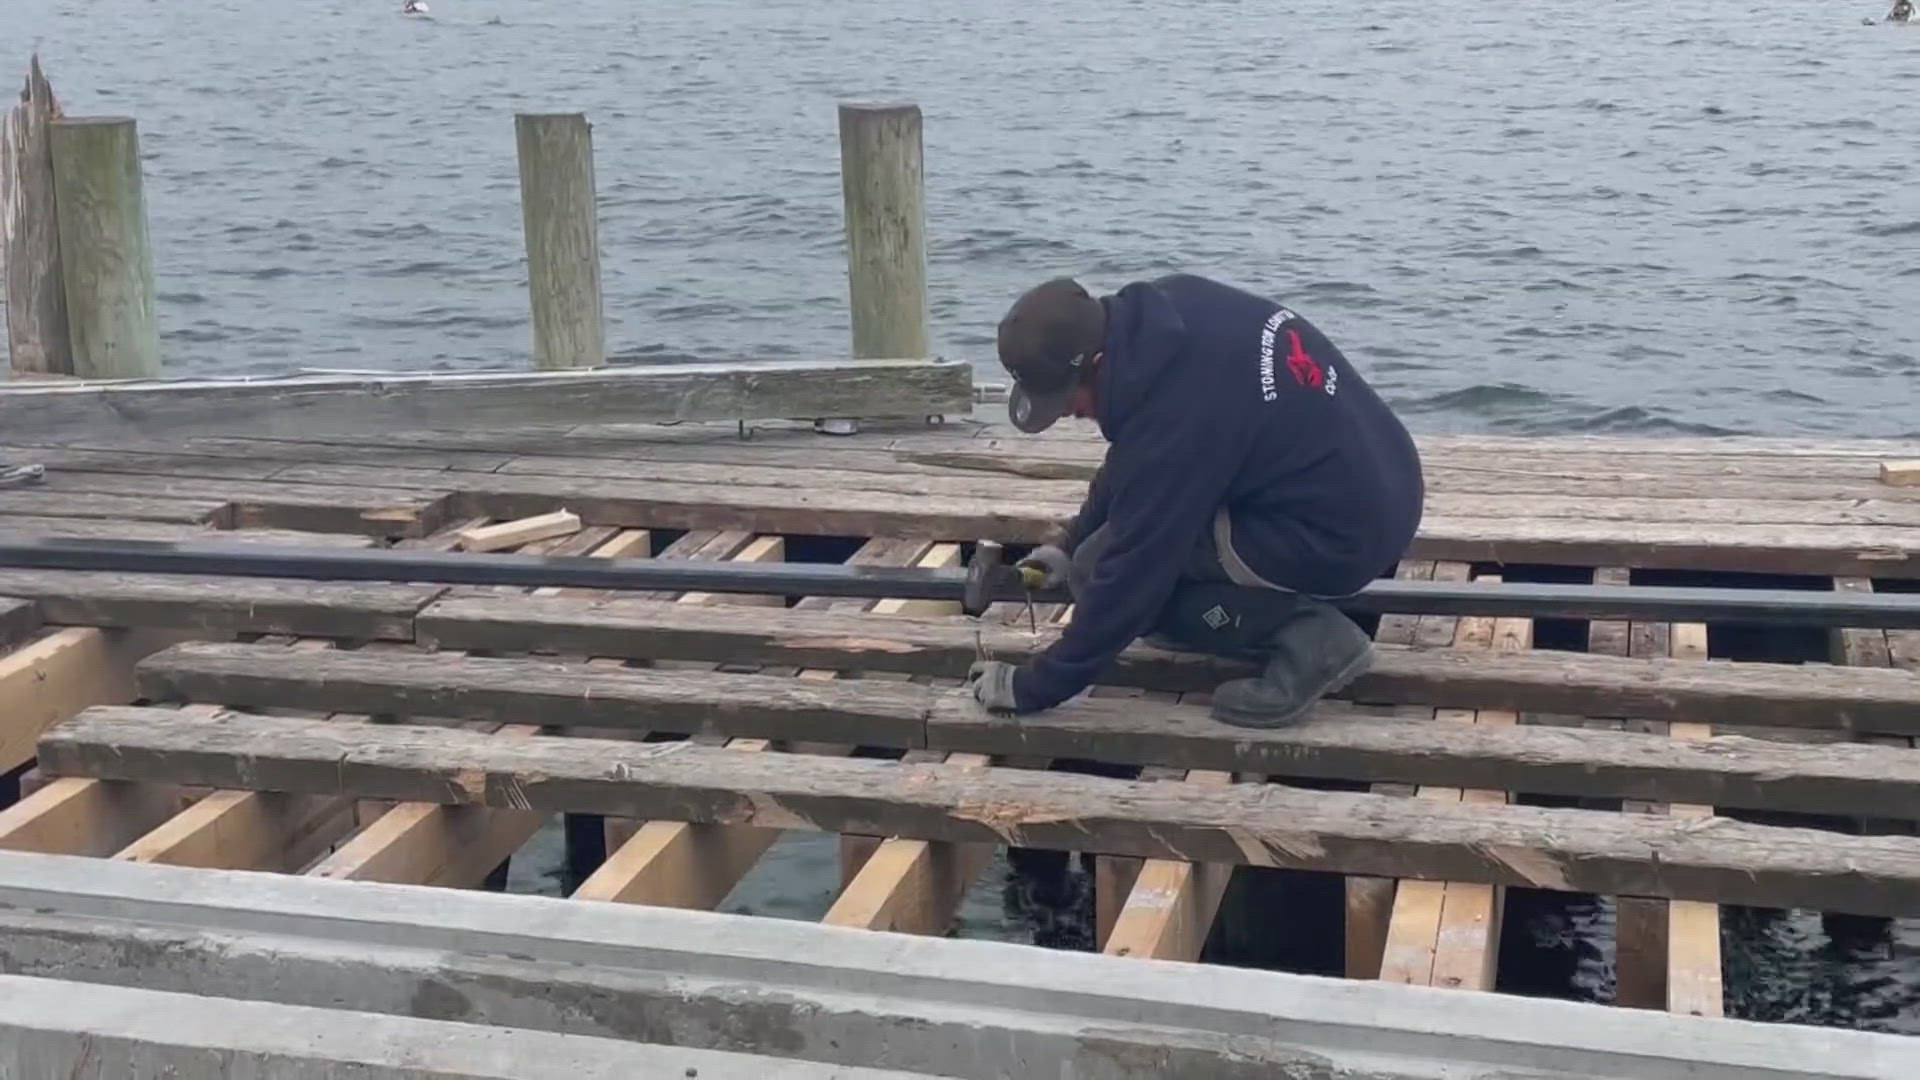 Workers in the lobster industry are scrambling to make out-of-pocket repairs to piers and other damaged property while they wait for state damage relief funding.